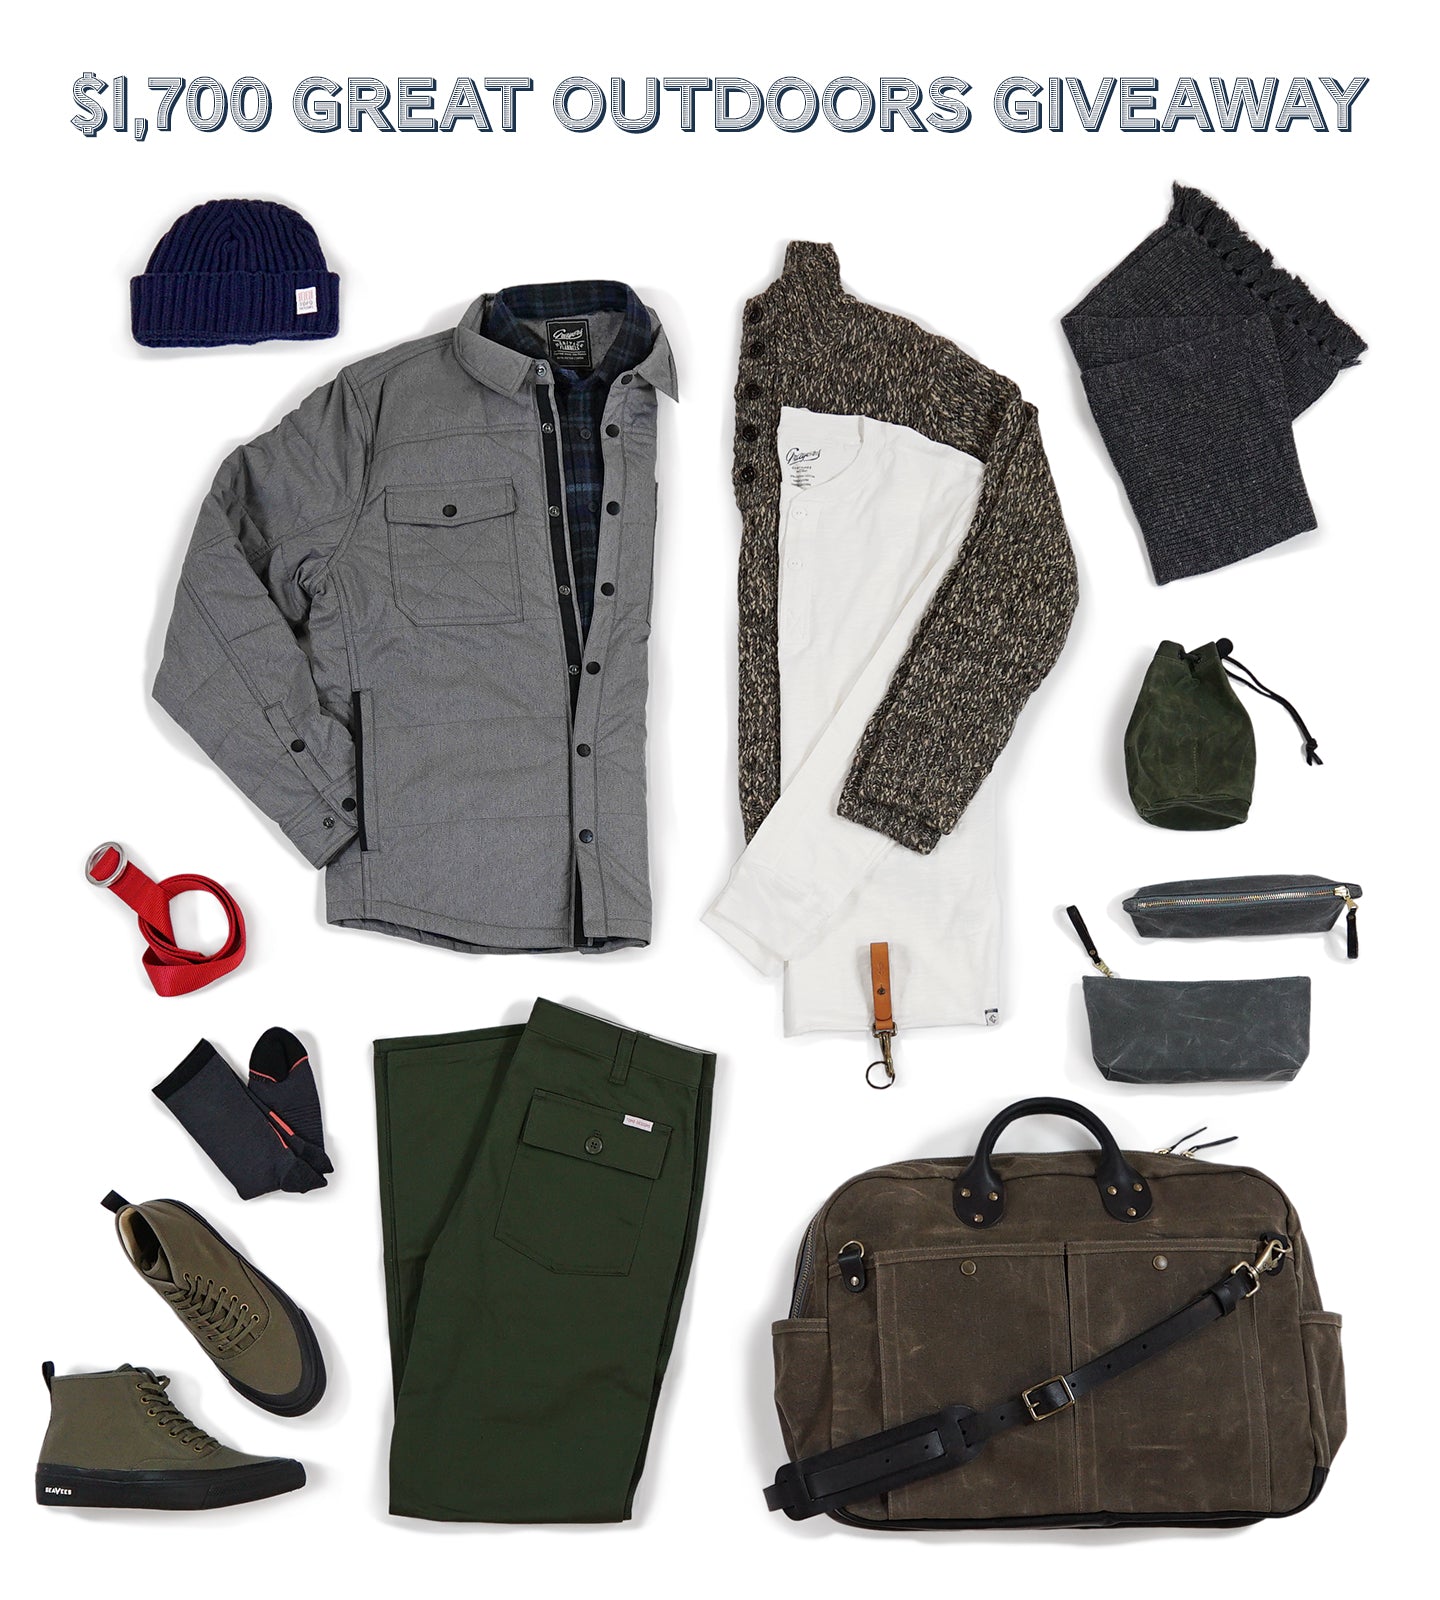 Winter Session x Grayers x Topo Designs x Seavees x Mountain Standard Giveaway